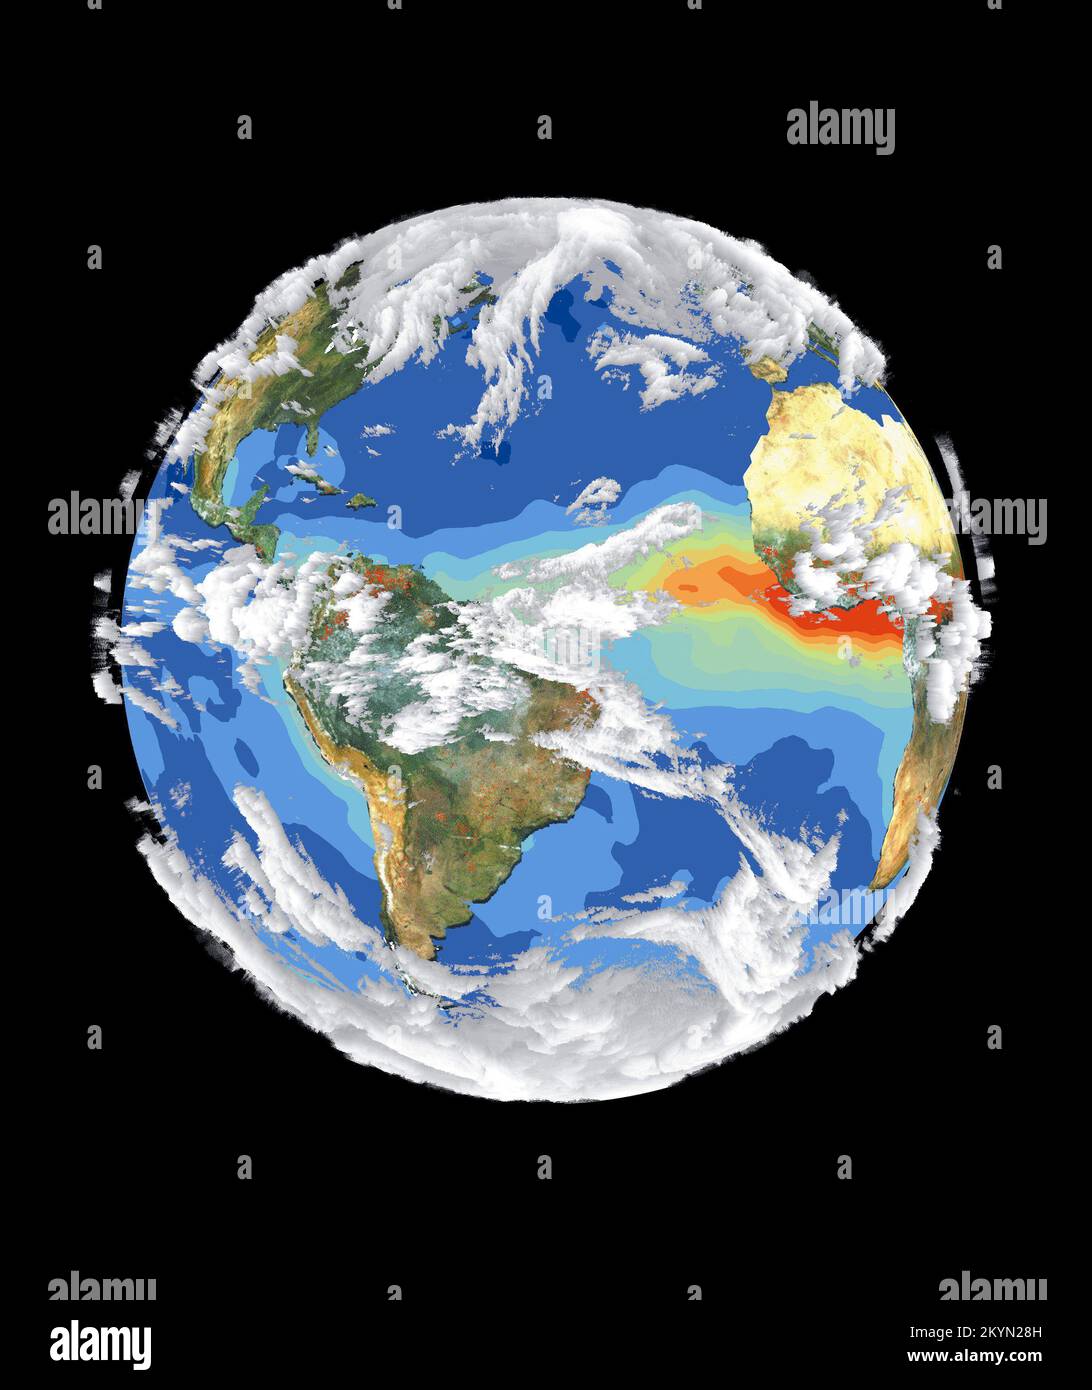 Satellite data and images such as those presented in this image of Earth give scientists a more comprehensive view of the Earth's interrelated systems and climate. Four different satellites contributed to the making of this image. Sea-viewing Wide Field-of-view Sensor (SeaWiFS) provided the land image layer and is a true color composite of land vegetation for cloud-free conditions from September 18 to October 3, 1997. Each red dot over South America and Africa represents a fire detected by the Advanced Very High Resolution Radiometer. The oceanic aerosol layer is based on National Oceanic and Stock Photo